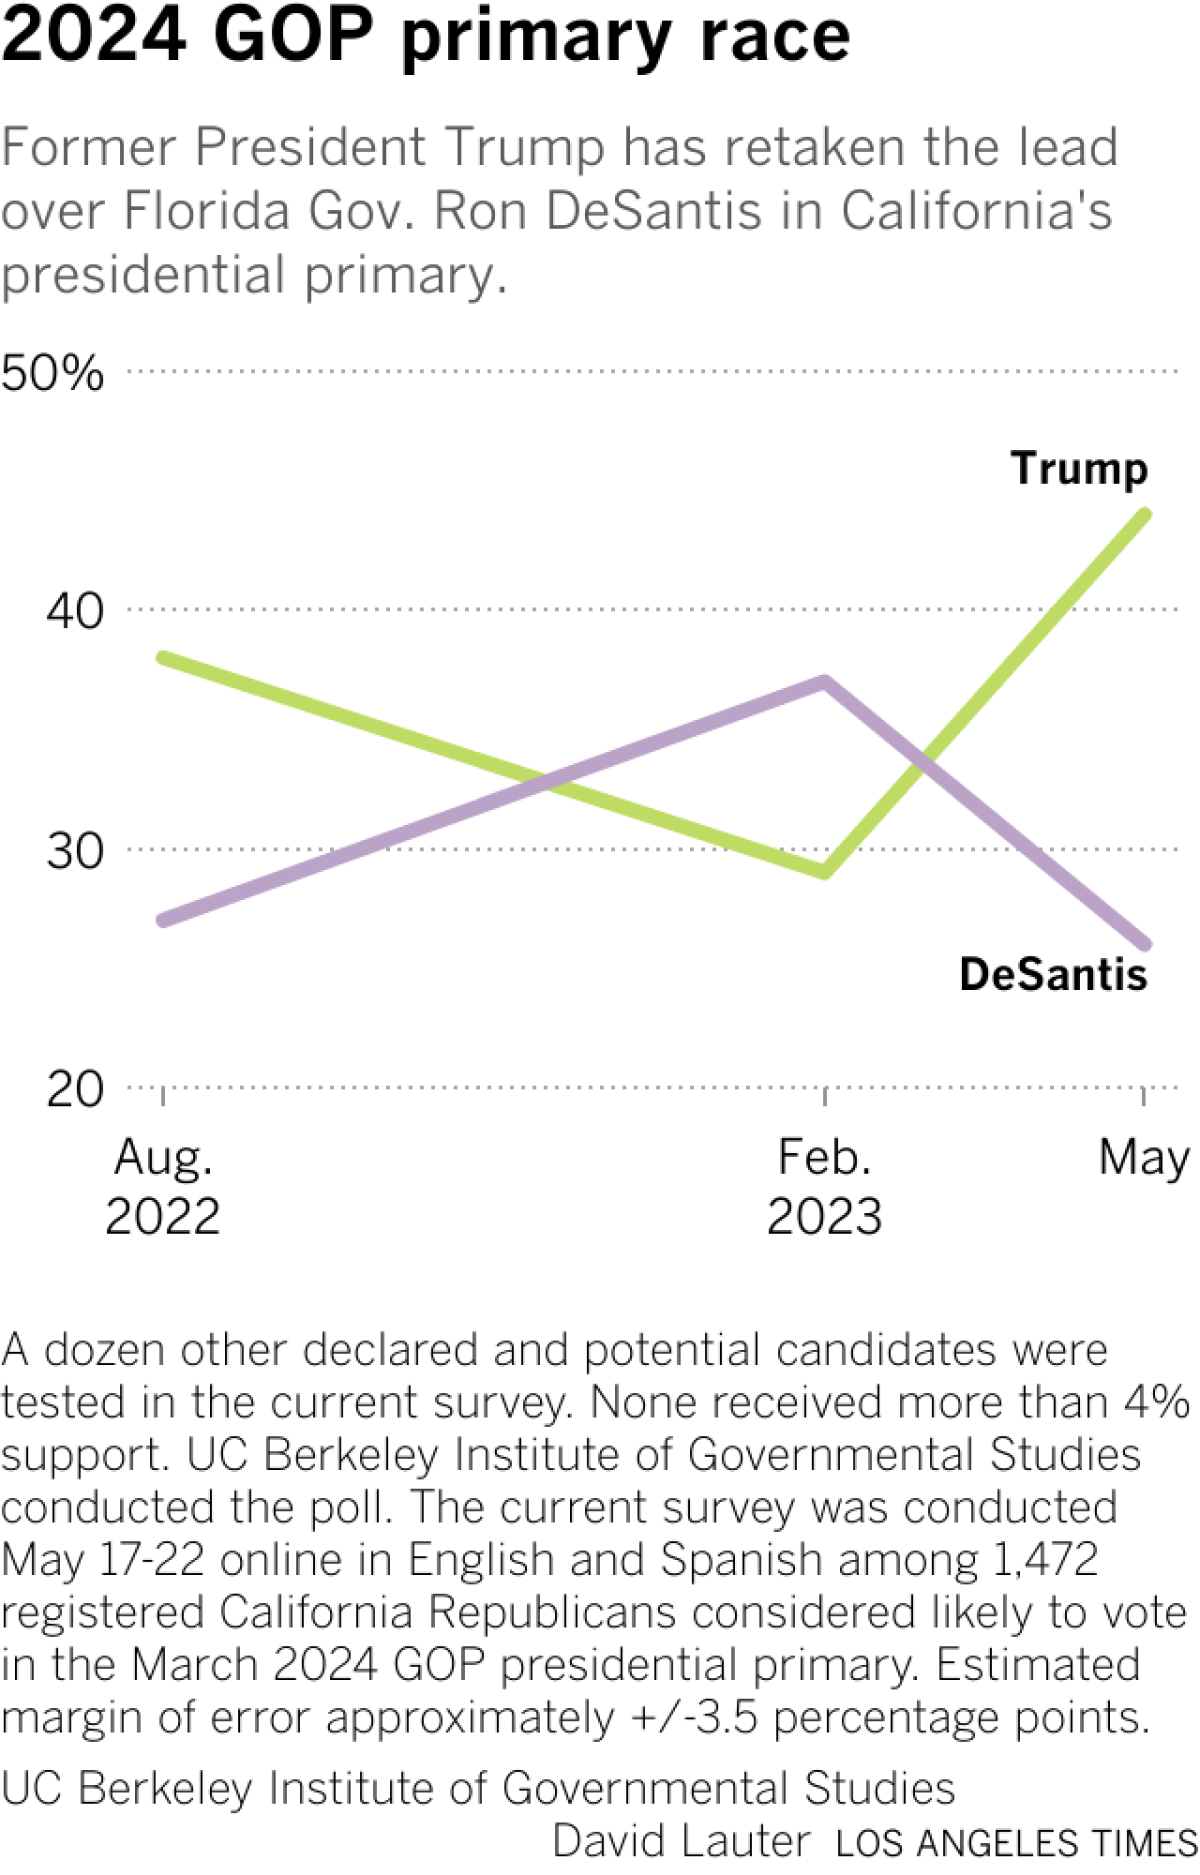 Line chart shows support among primary voters for Trump and DeSantis